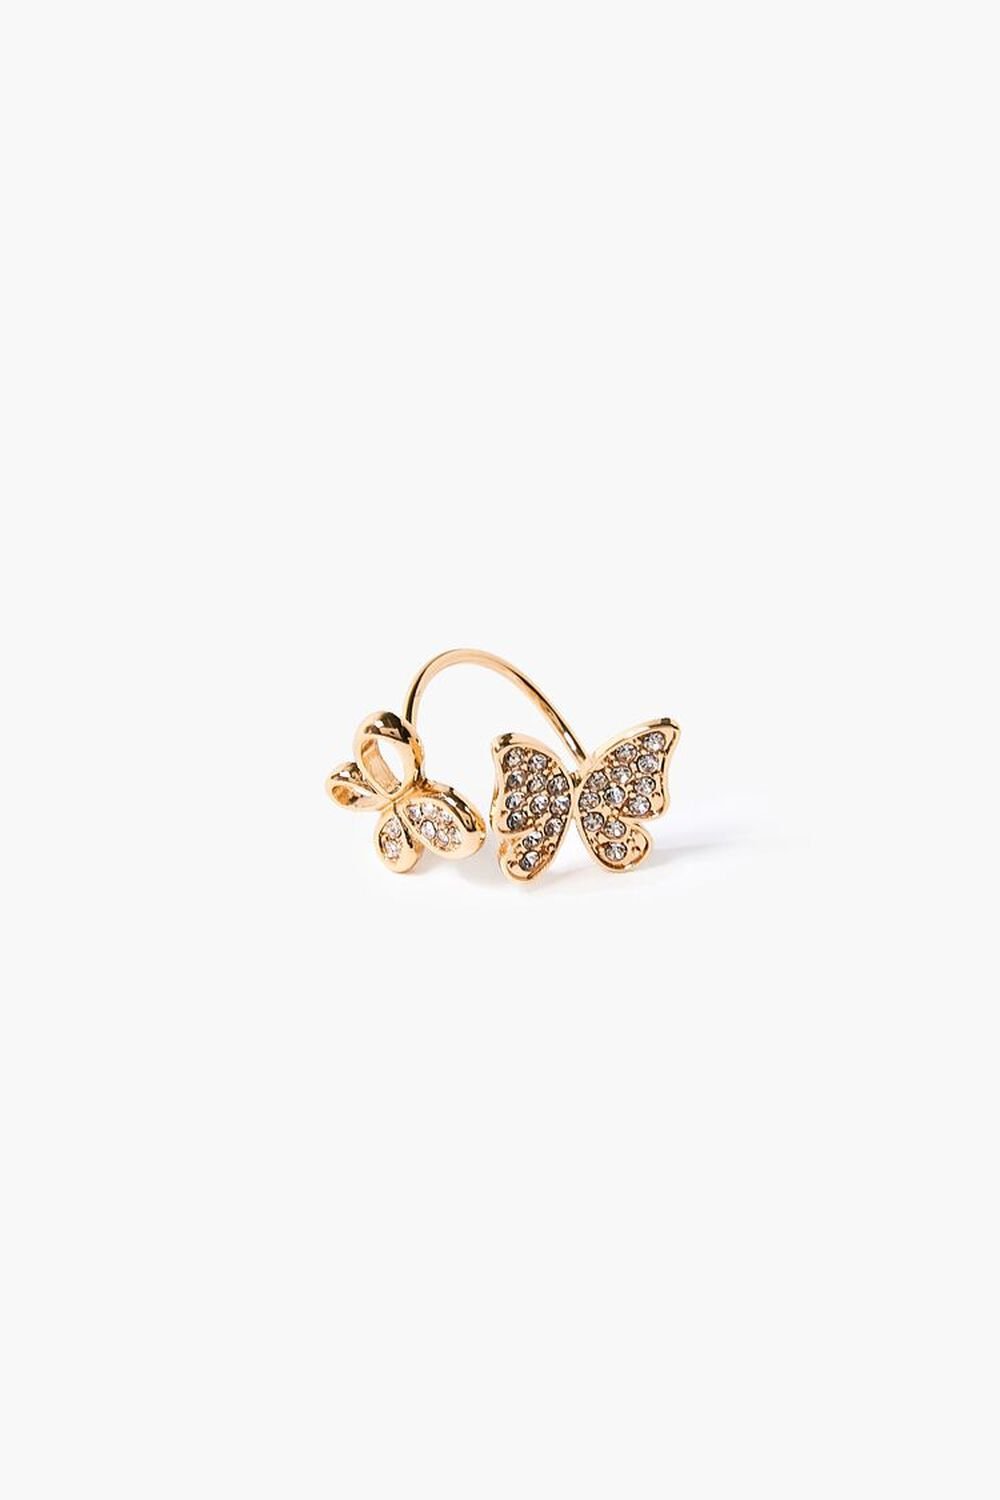 GOLD Faux Gem Butterfly Ring, image 1